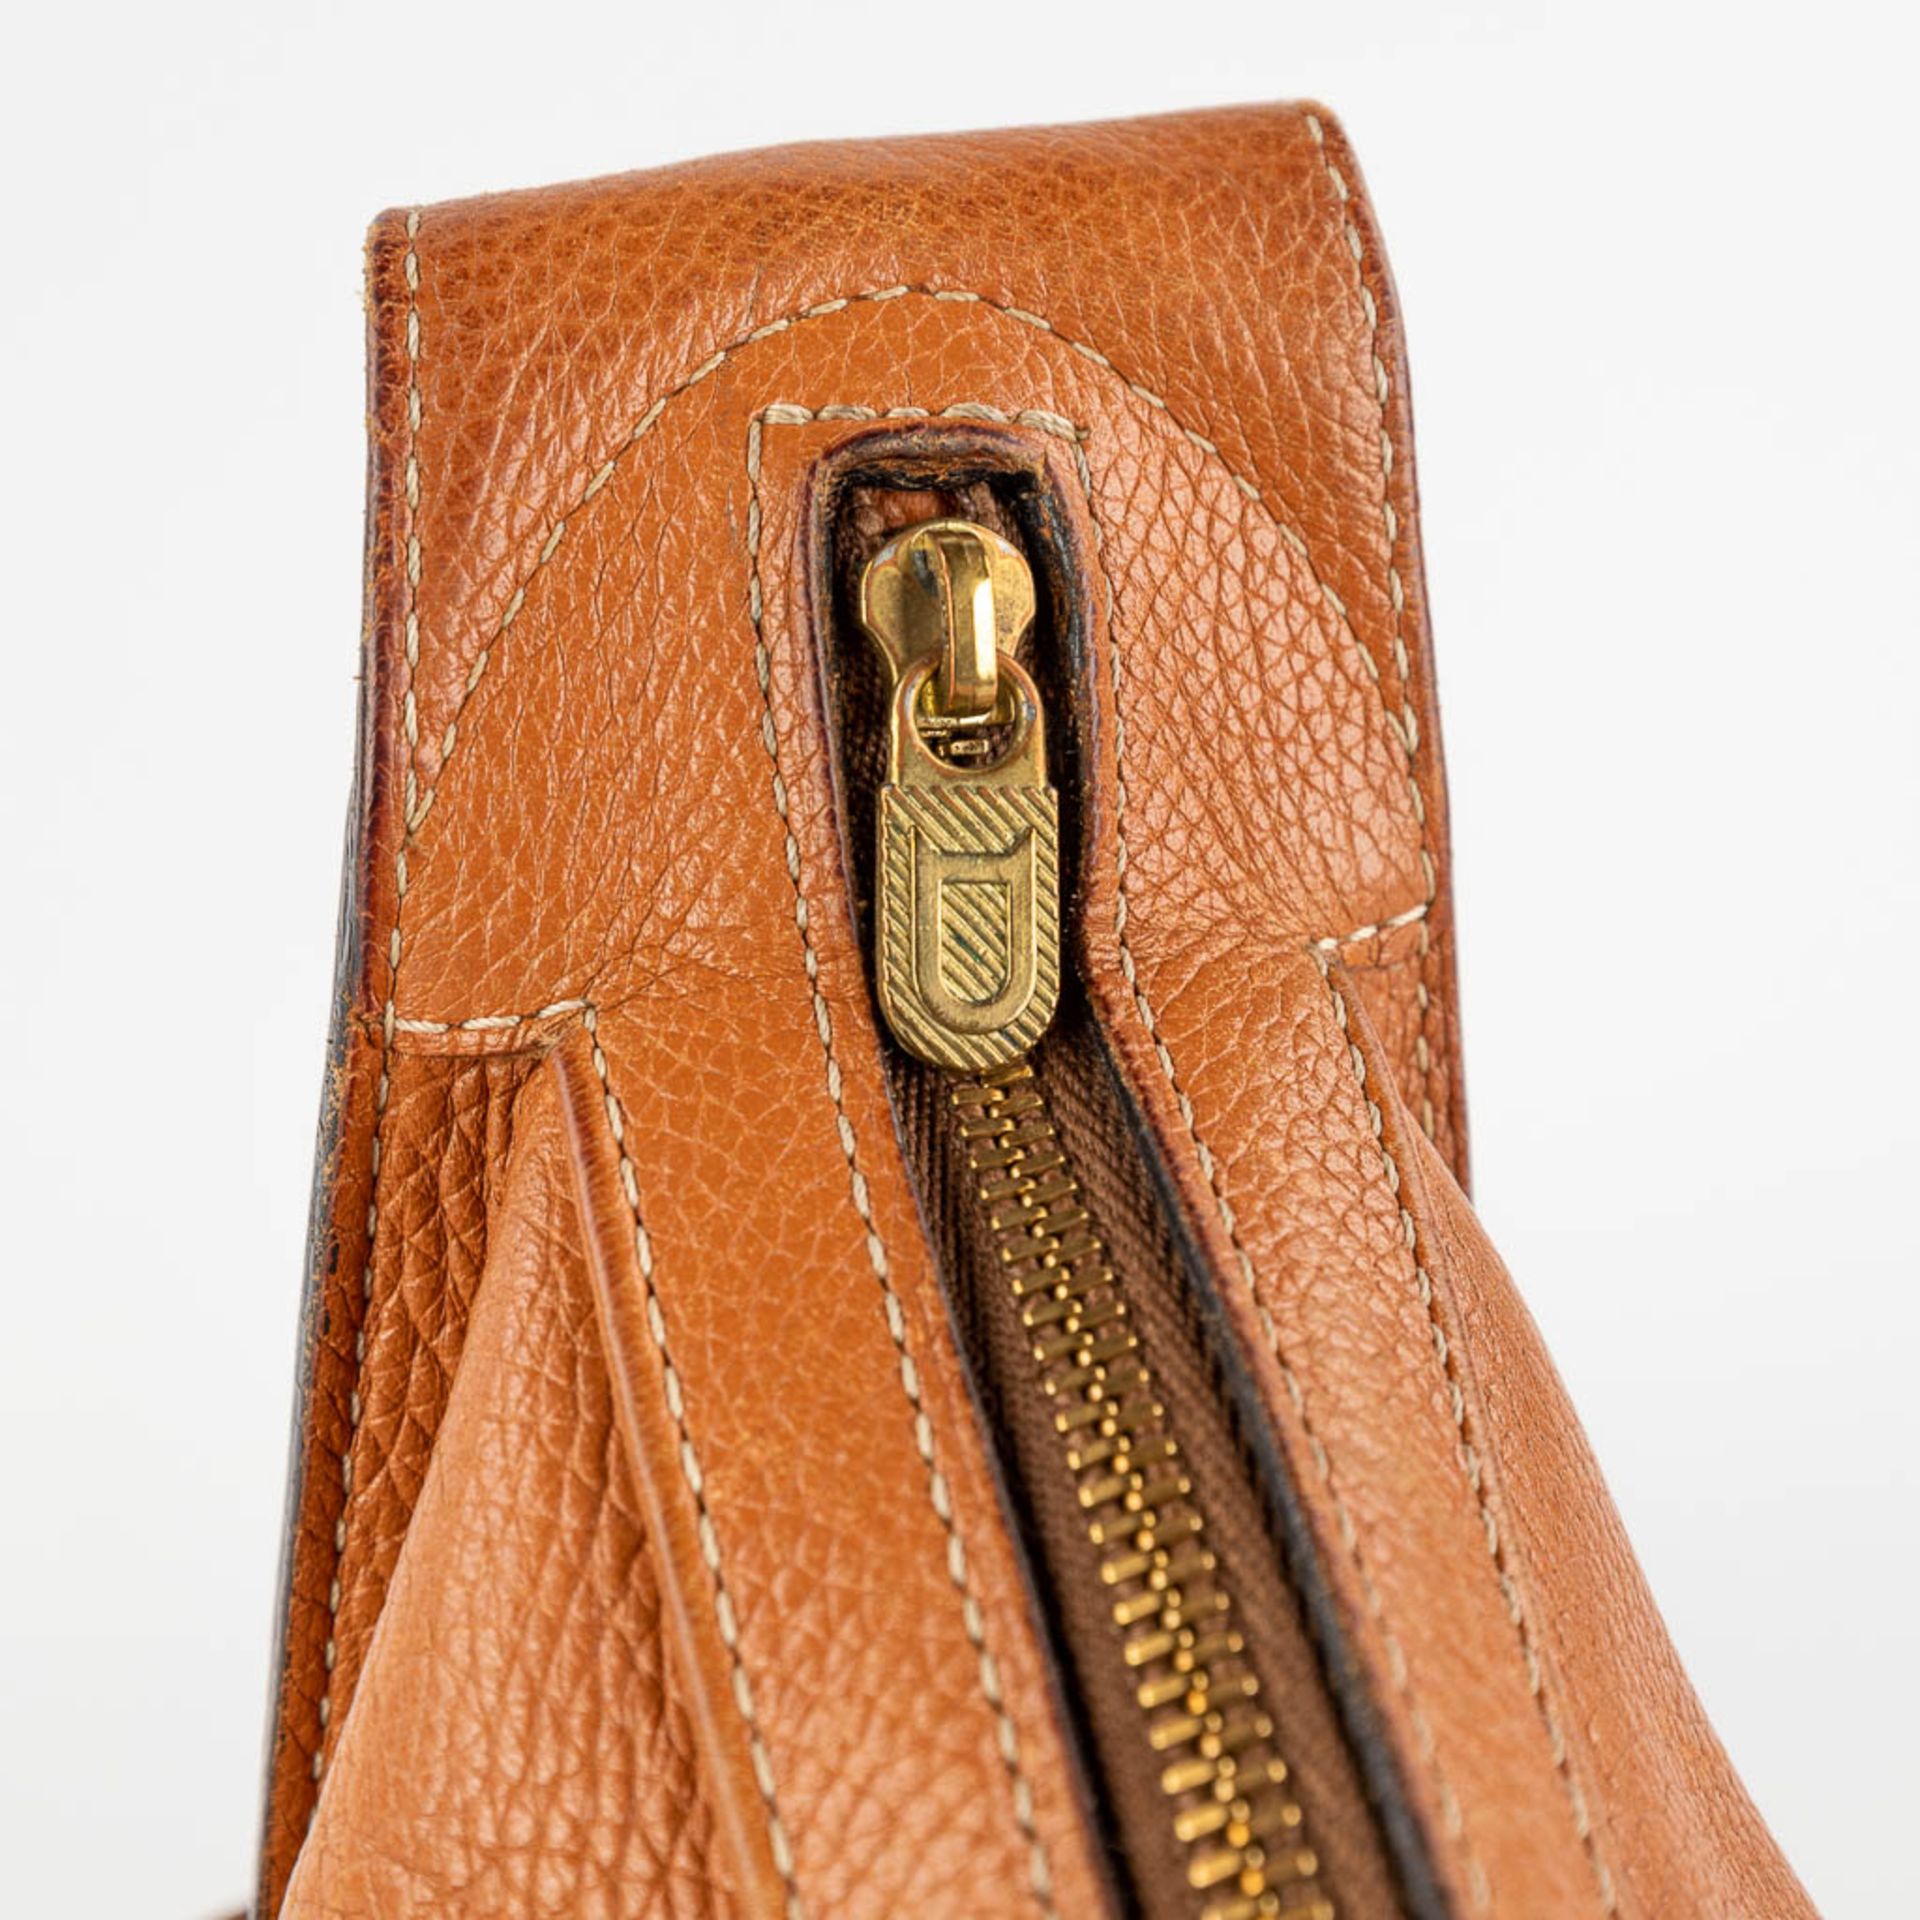 Delvaux, Pensée, a handbag made of brown leather. (W:24 x H:32 cm) - Image 13 of 18